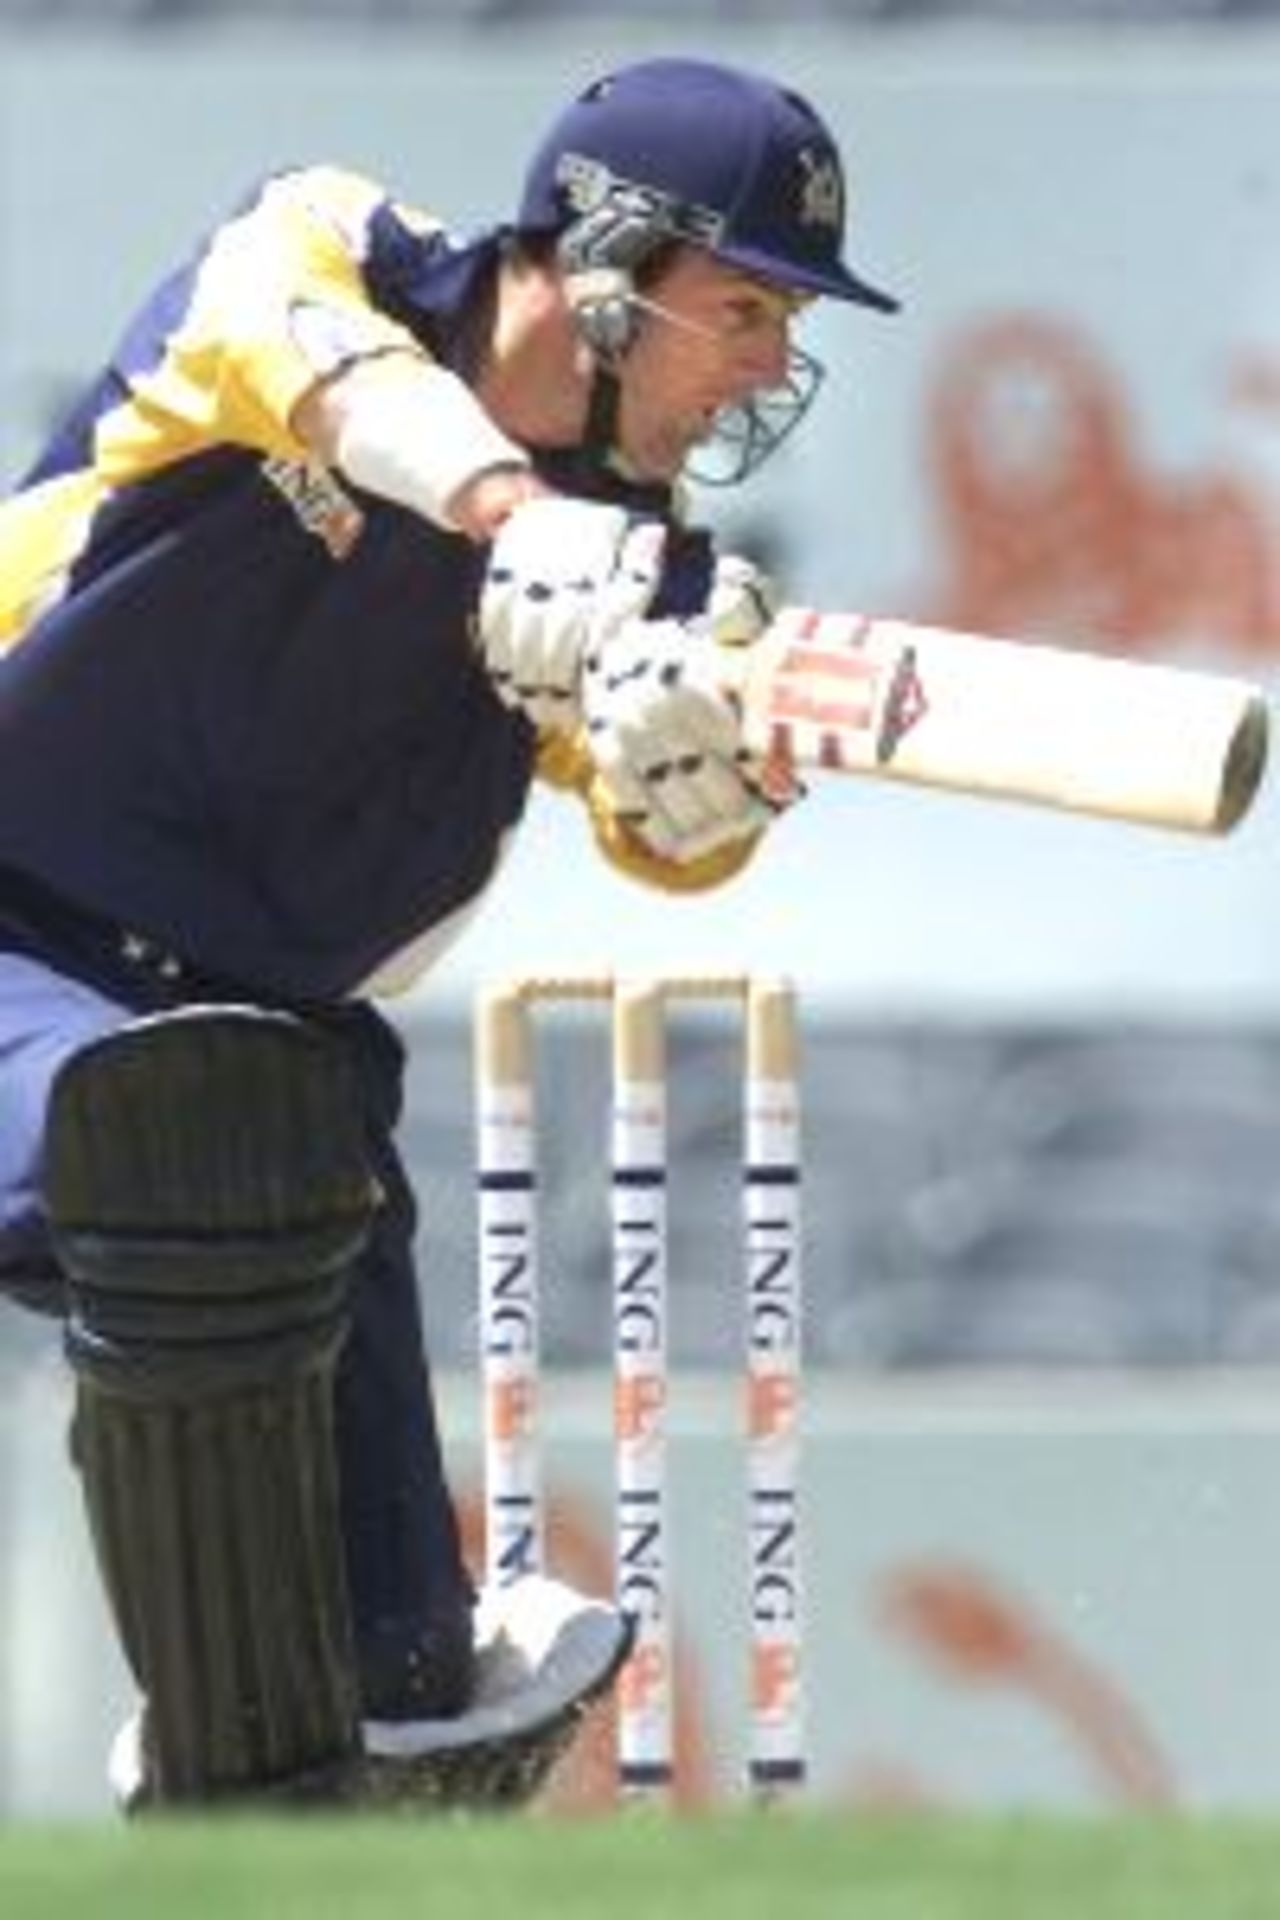 23 Dec 2001: Matthew Elliott of the Bushrangers in action on his way to top scoring for his team with 60 runs, during the ING Cup match between the Victoria Bushrangers and the West Australian Warriors, played at the MCG, Melbourne, Australia.